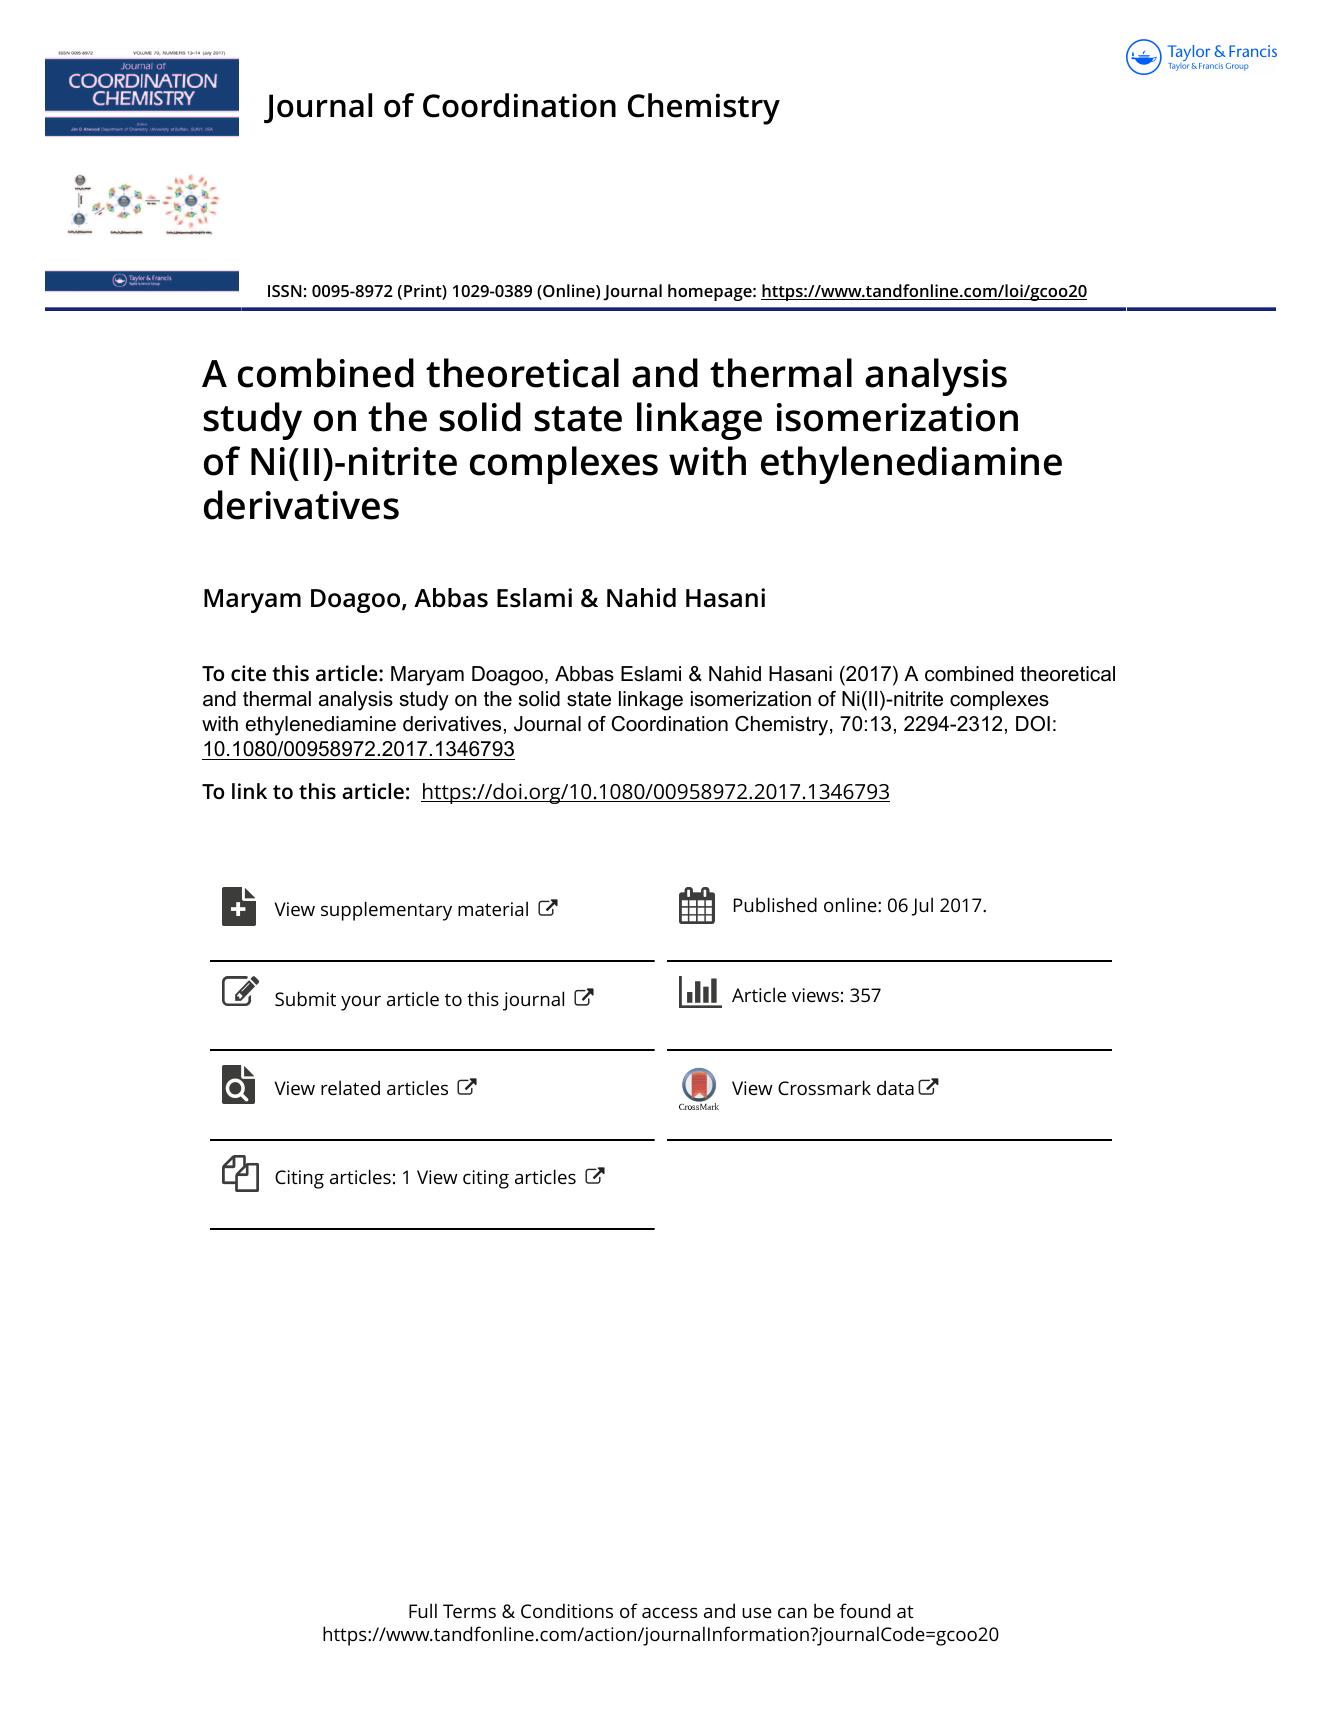 A combined theoretical and thermal analysis study on the solid state linkage isomerization of Ni(II)-nitrite complexes with ethylenediamine derivatives by Maryam Doagoo & Abbas Eslami & Nahid Hasani